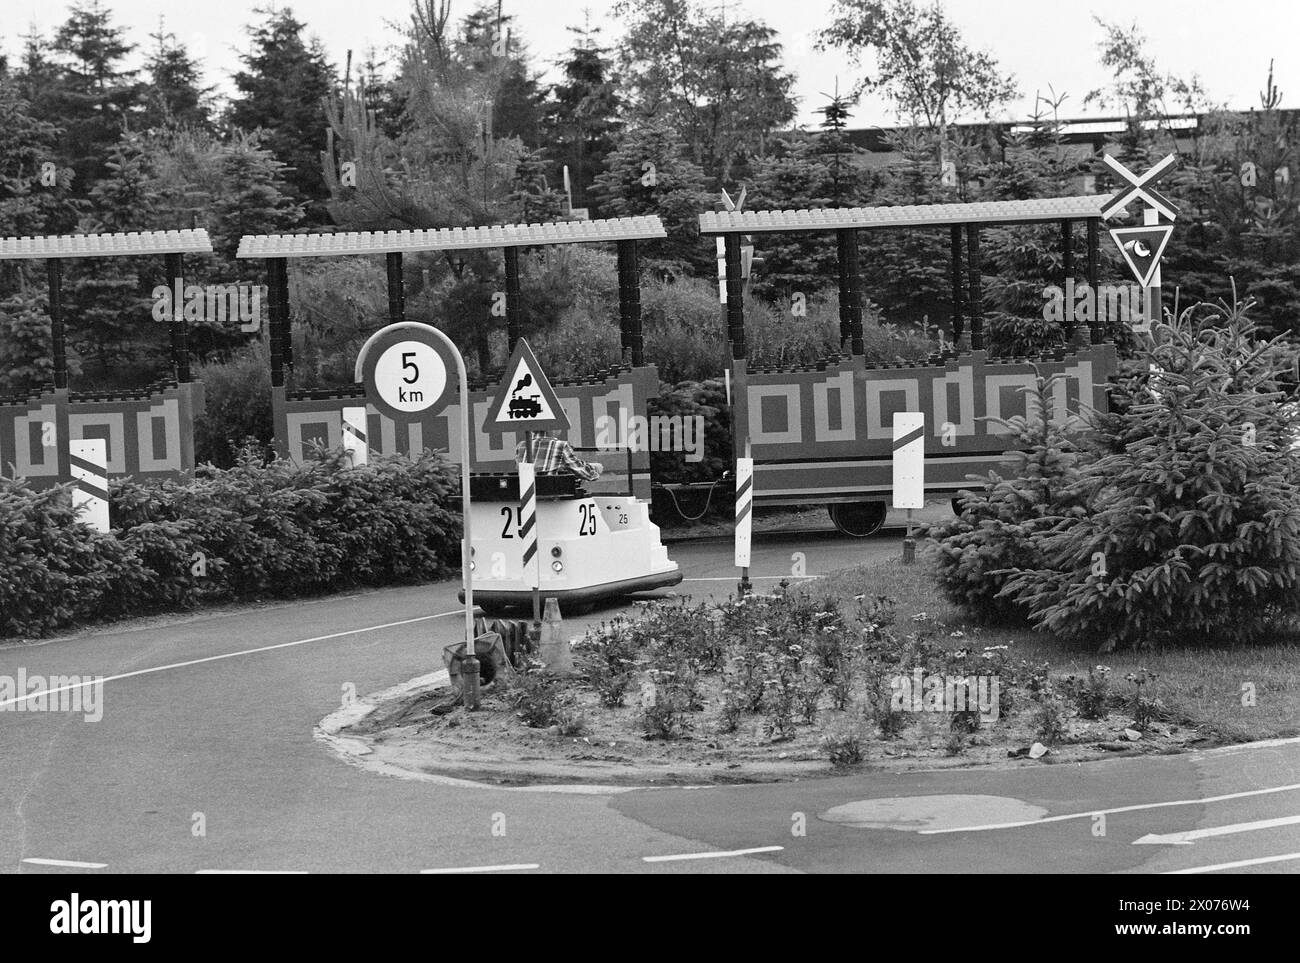 Current 30 - 6 - 1973: Playland for young and oldLegoland is a mini-kingdom that lives only on tourism. Last year, this fantasy world near Billund in Denmark was visited by no less than 777,000 enthusiastic people – young and old. The peak visit in one day is 20,000 people. Legoland is an adventure world for children, but it still attracts more adults. Last year, fully 70 per cent of the visitors were adults.  Legoland has its own traffic school for school-age children. The children drive around a city with regular traffic problems and are told through loudspeakers about mistakes they make.  P Stock Photo